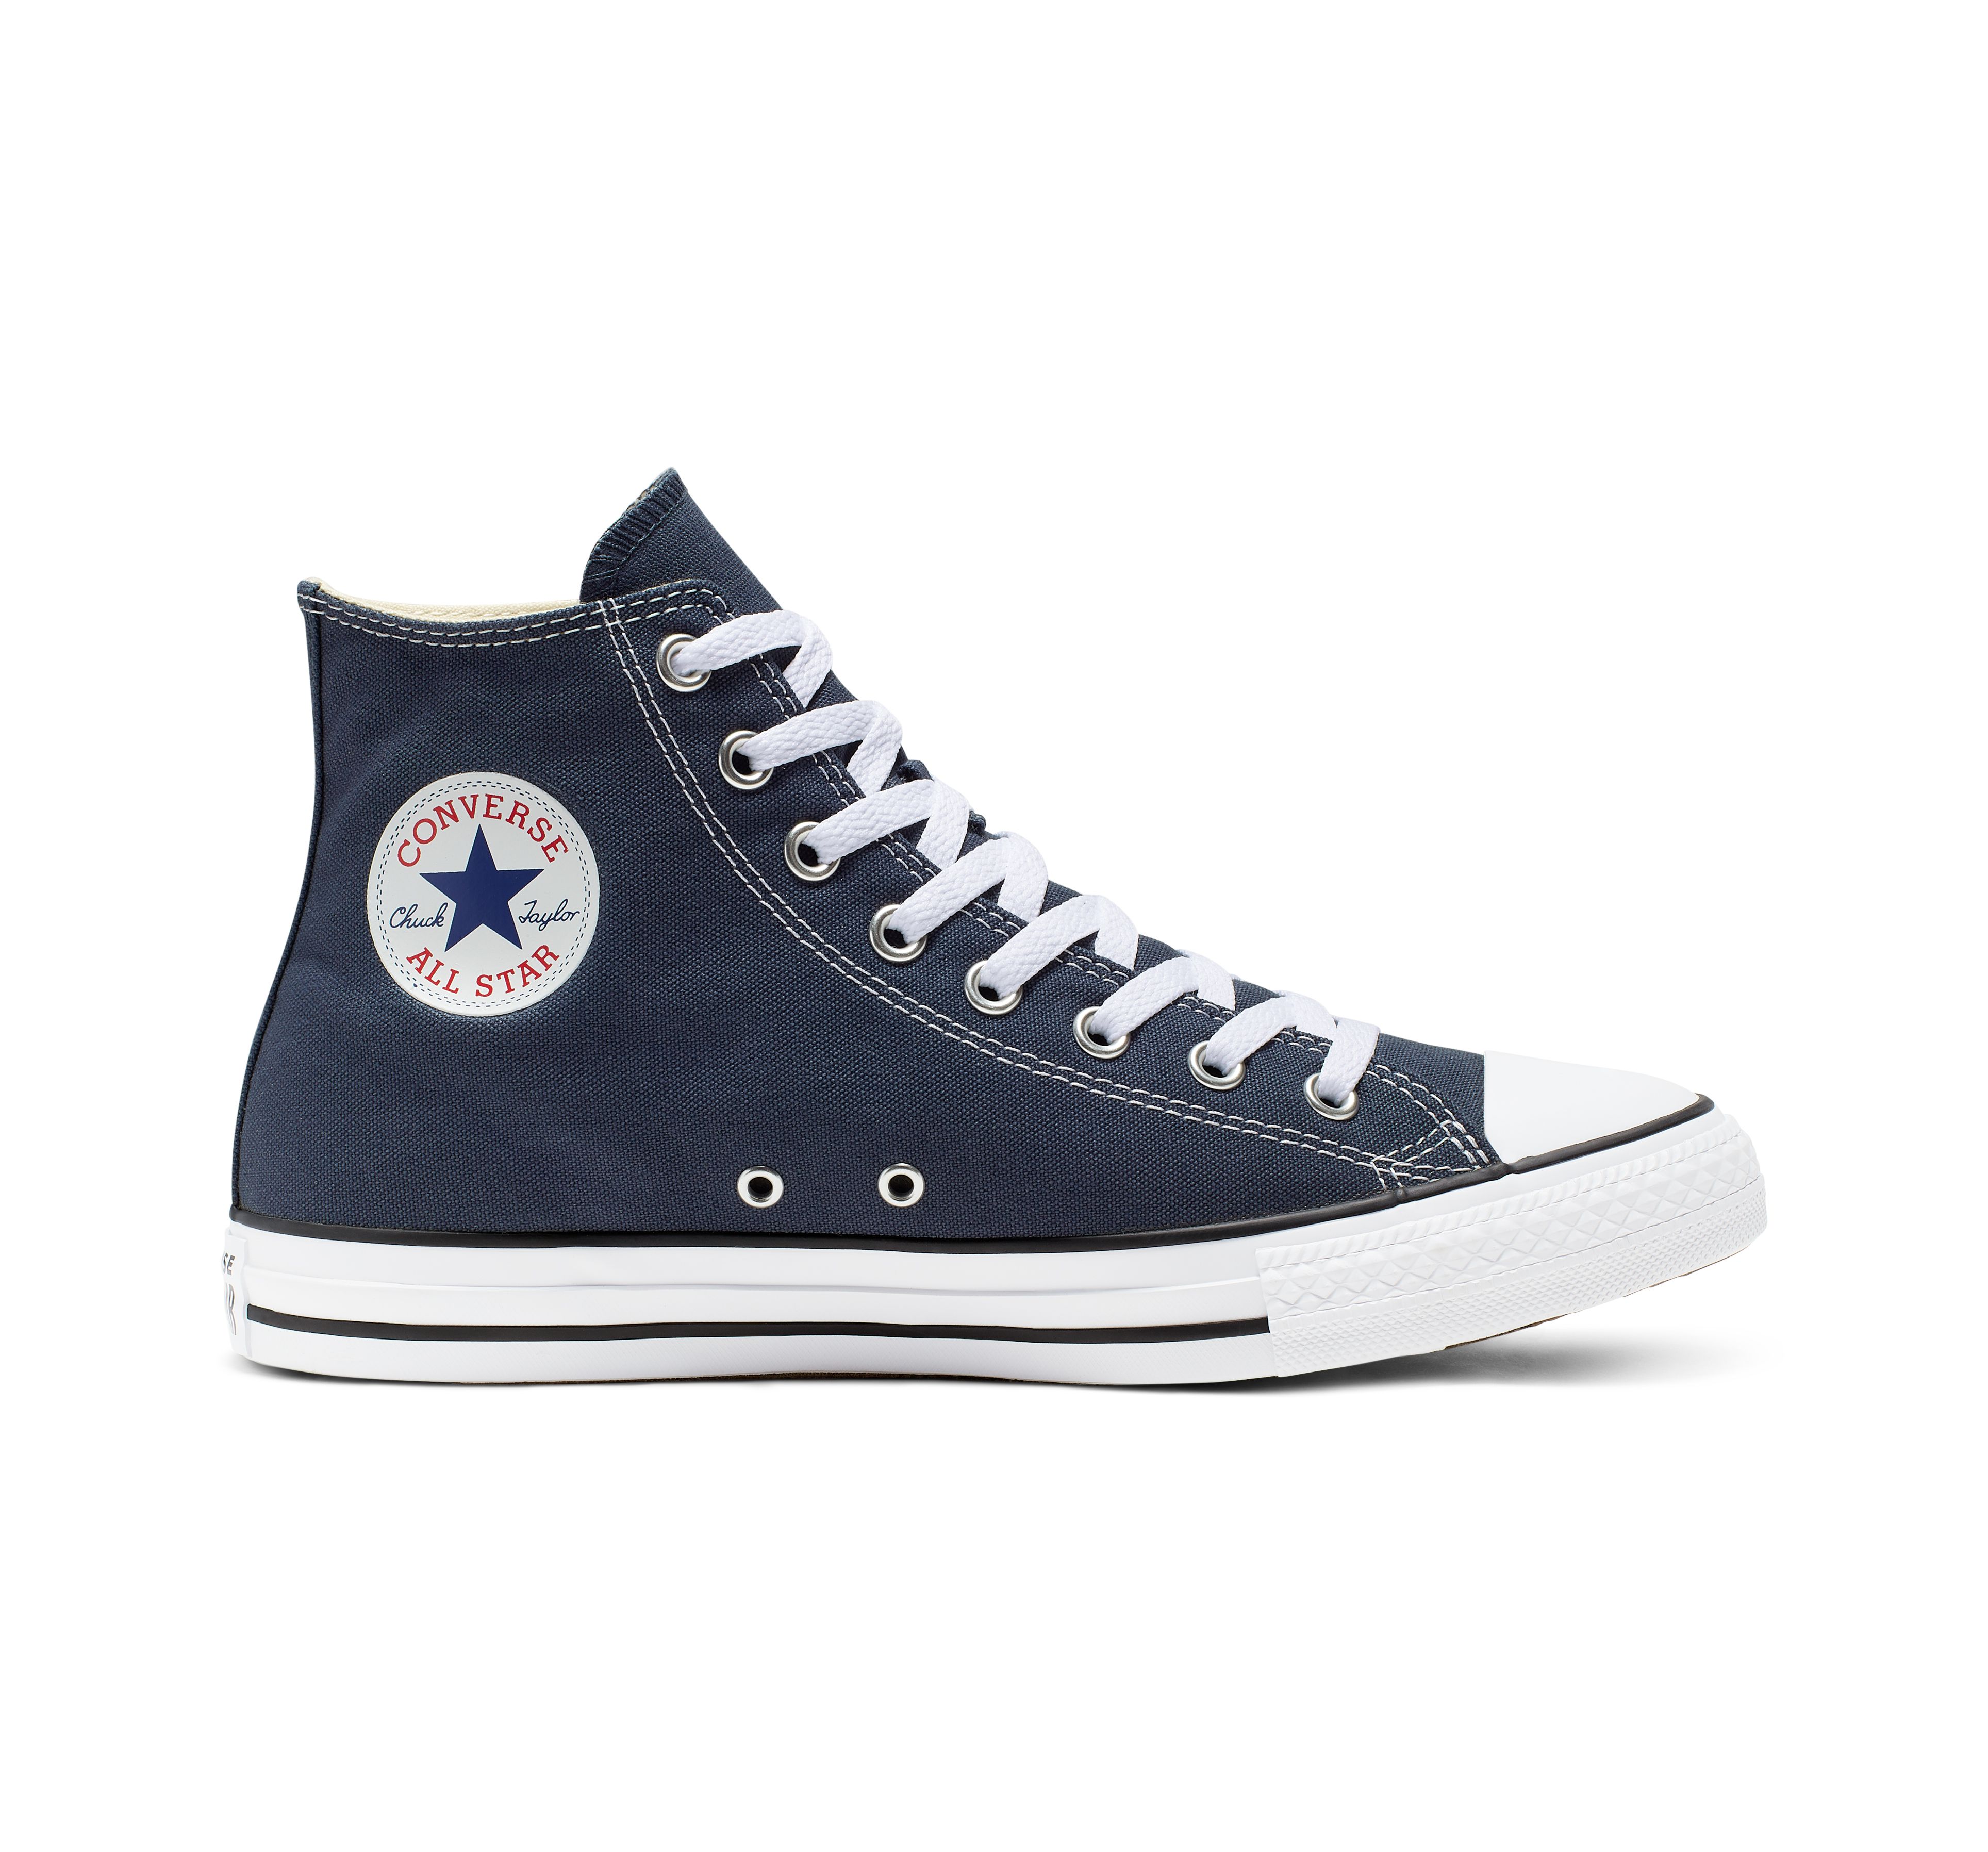 Buy Converse Top Products Online at Best Price | lazada.com.ph